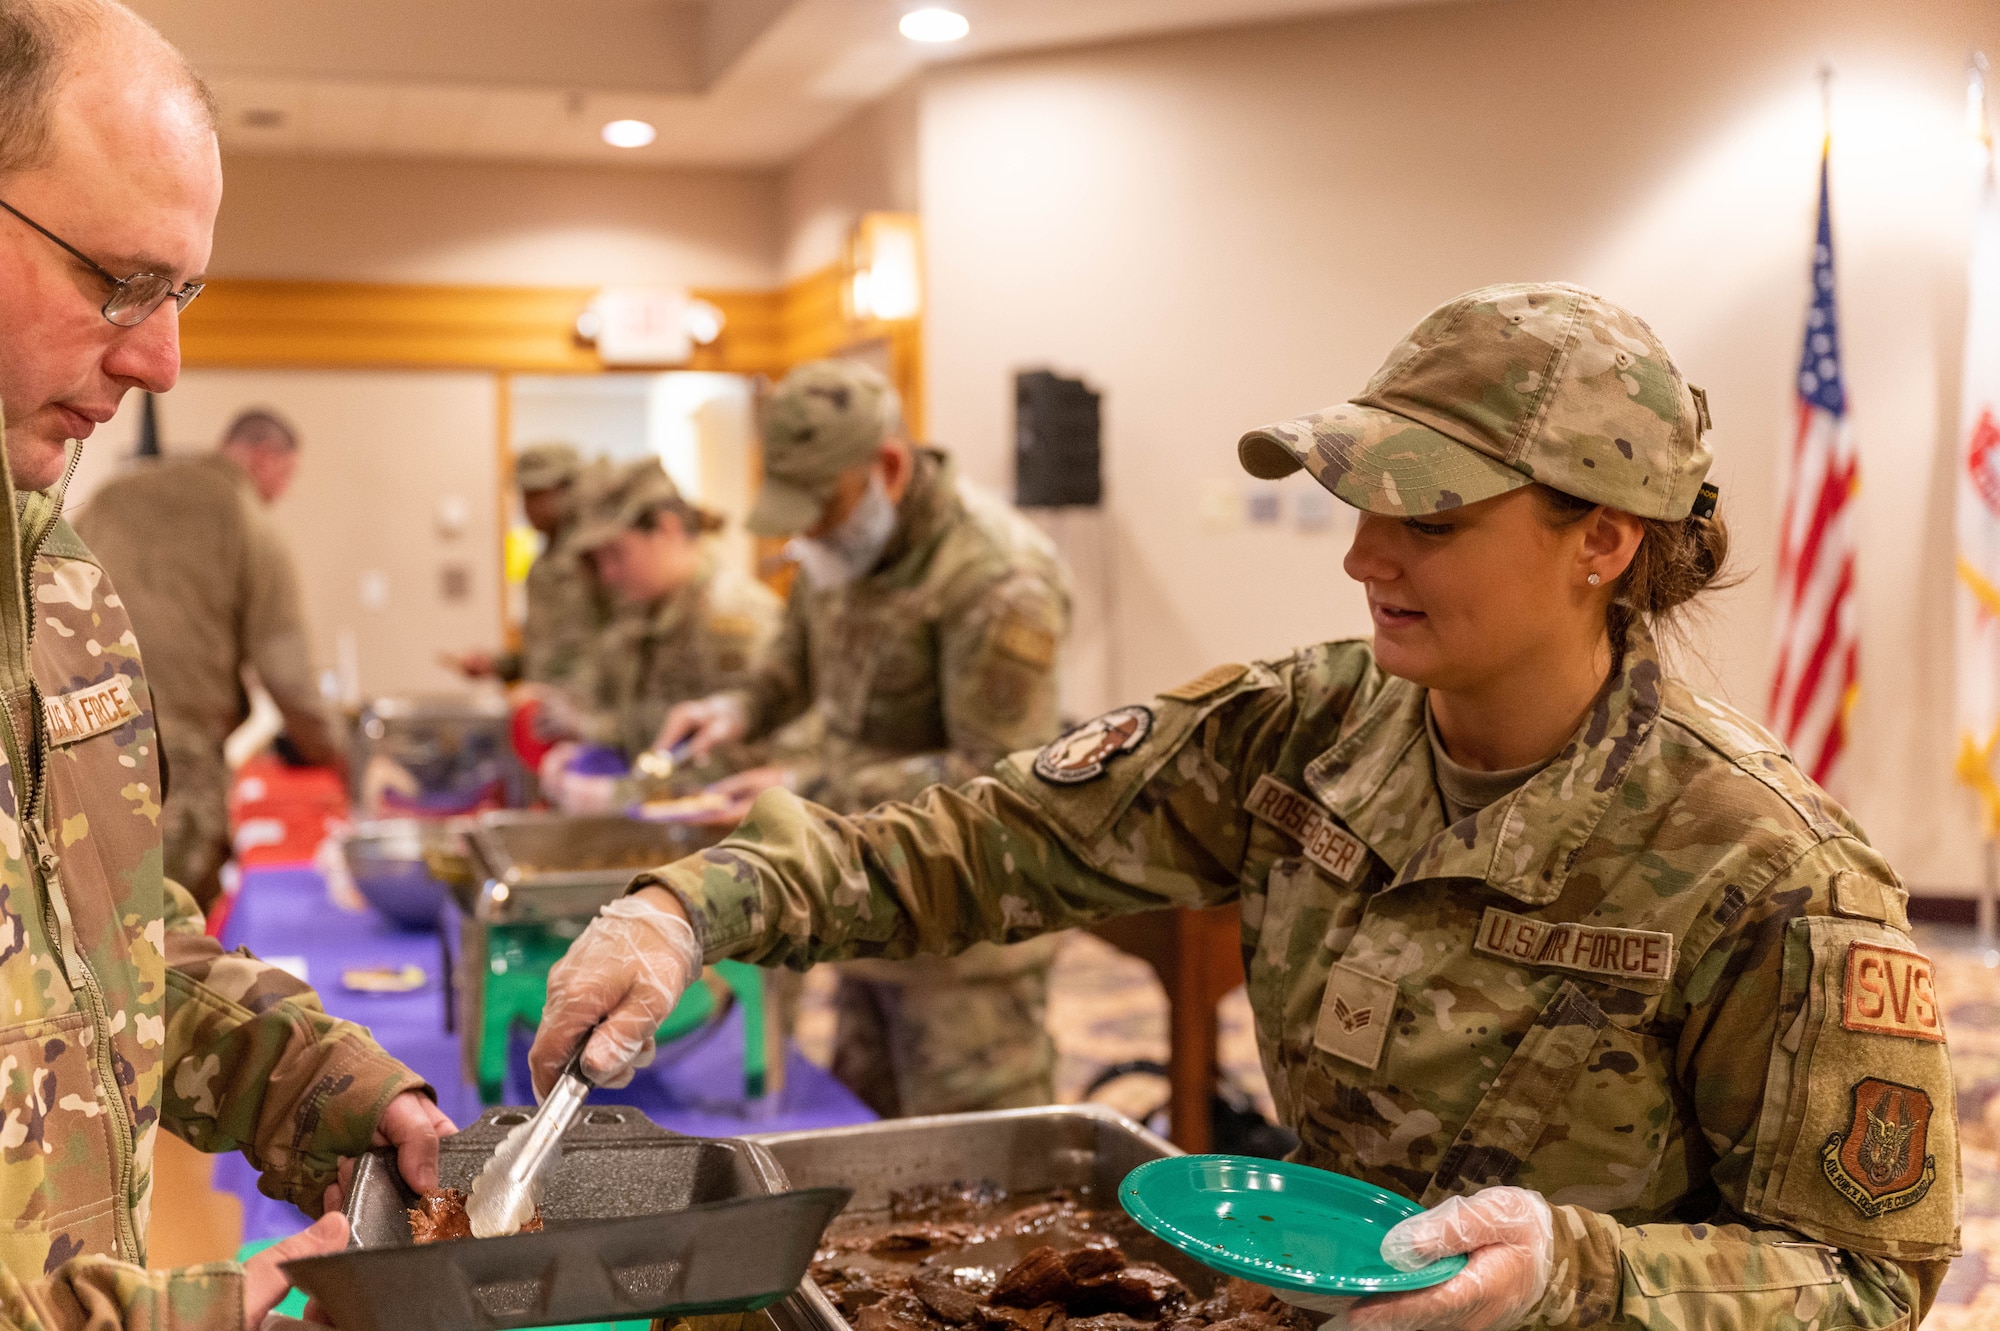 Senior Airman Samantha Rosenberger, 934th Force Support Squadron services specialist, serves flank steak during the 934th Airlift Wing’s first Celebration of Nations event at Minneapolis-Saint Paul Air Reserve Station, Minnesota, Nov. 5, 2022. This event provided Airmen an opportunity to try culturally different foods, listen to different music and look at different types of clothes. (U.S. Air Force photo by Airman First Class Colten Tessness)